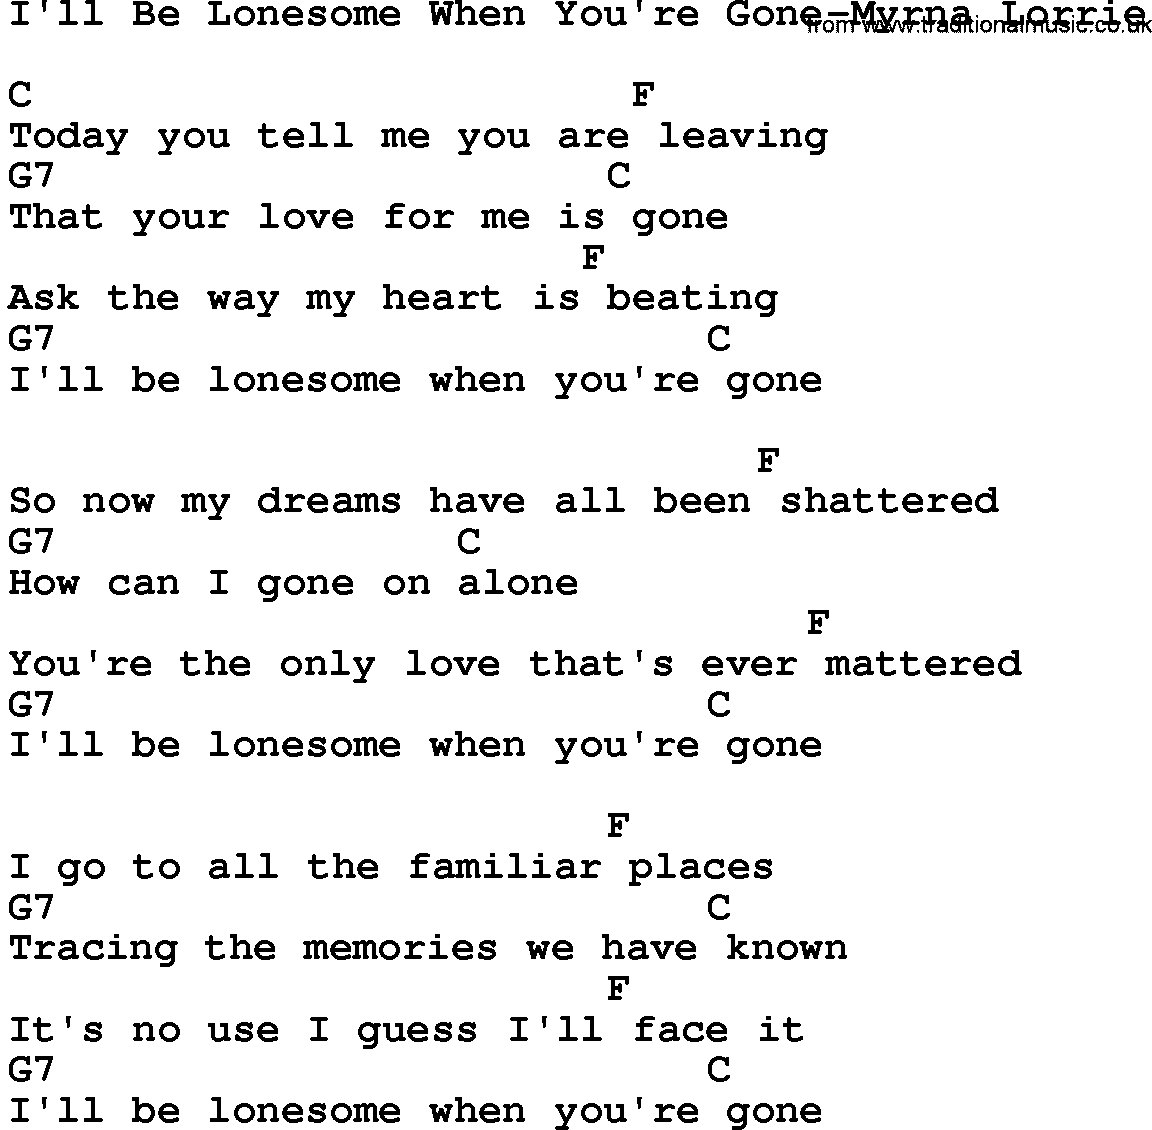 Country music song: I'll Be Lonesome When You're Gone-Myrna Lorrie lyrics and chords